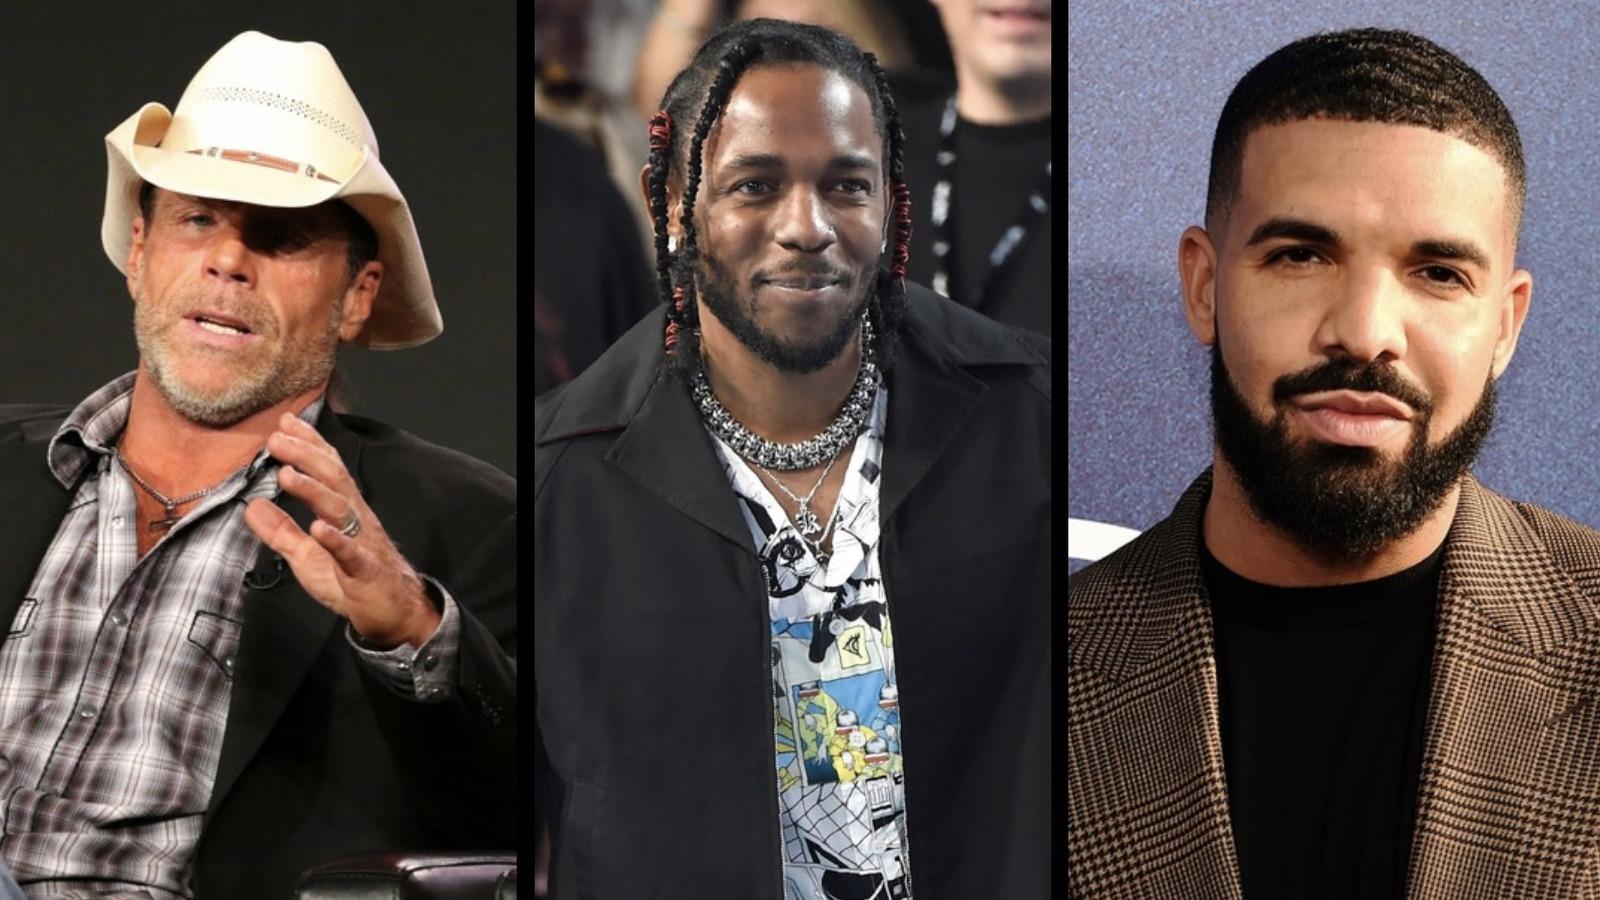 Shawn Michaels believes that Kendrick Lamar and Drake should settle their rap beef in a WWE ring